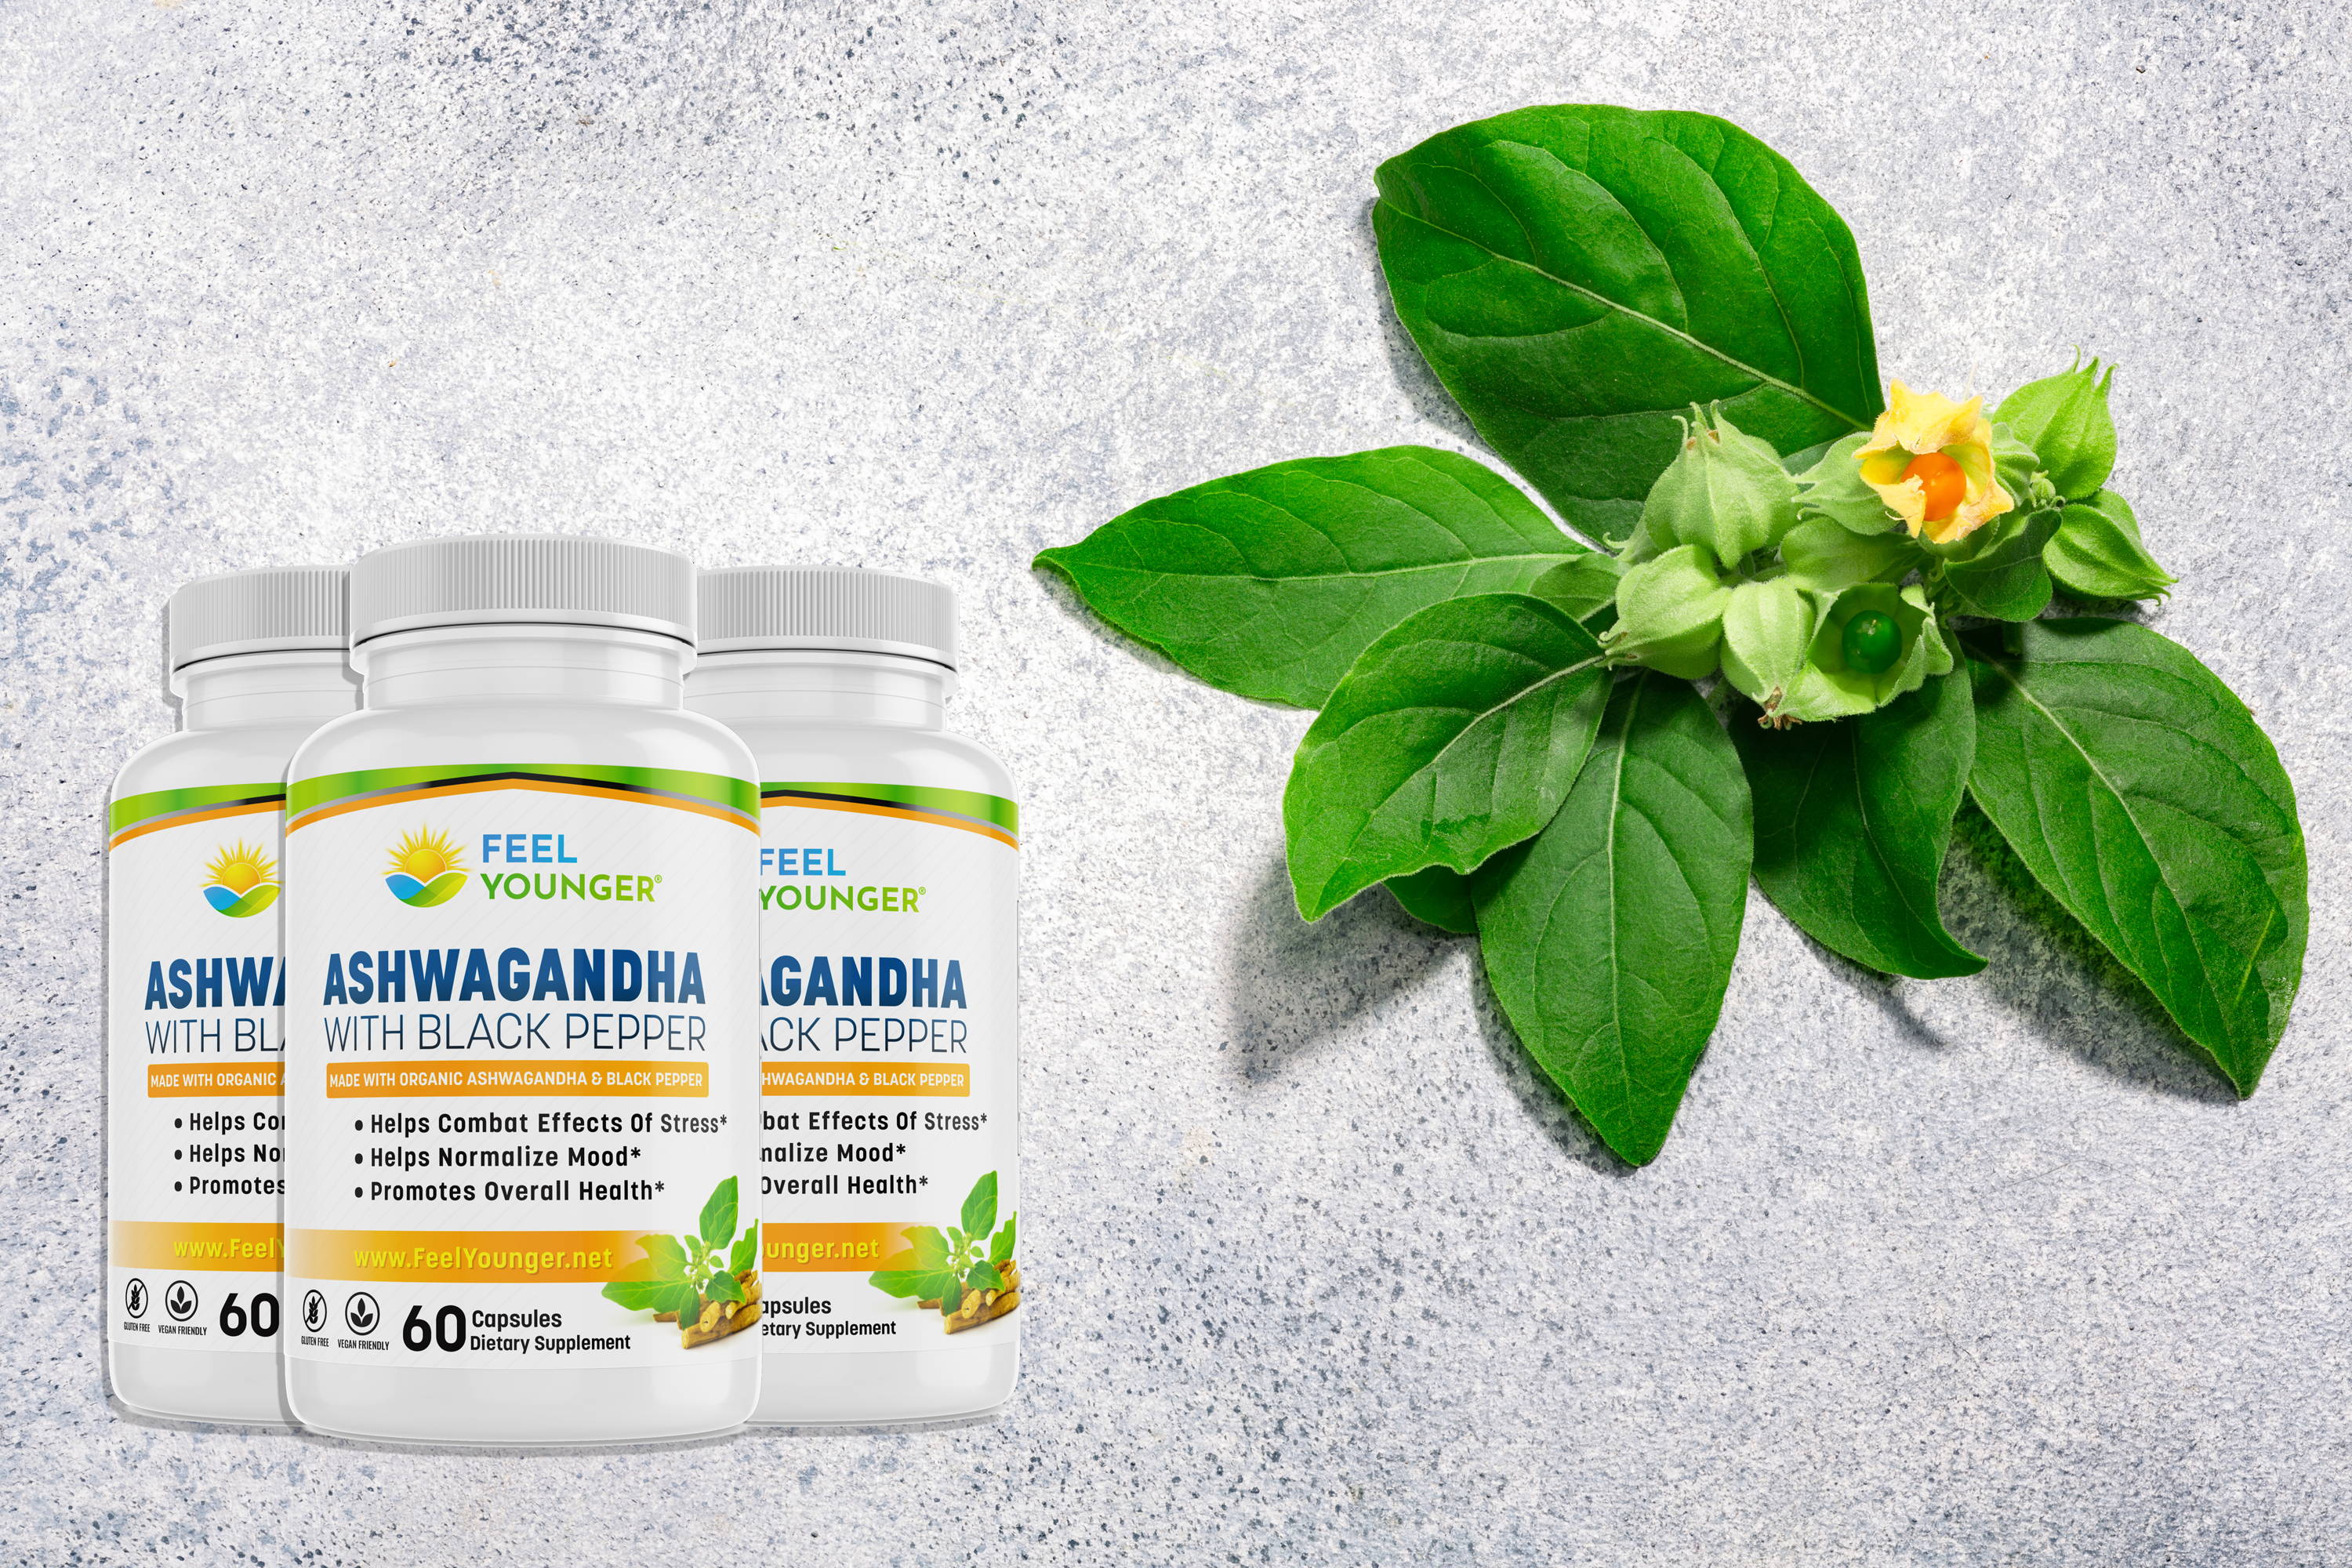 Feel Younger's Organic Ashwagandha Capsules are the best form you can find, because it's ashwagandha with black pepper